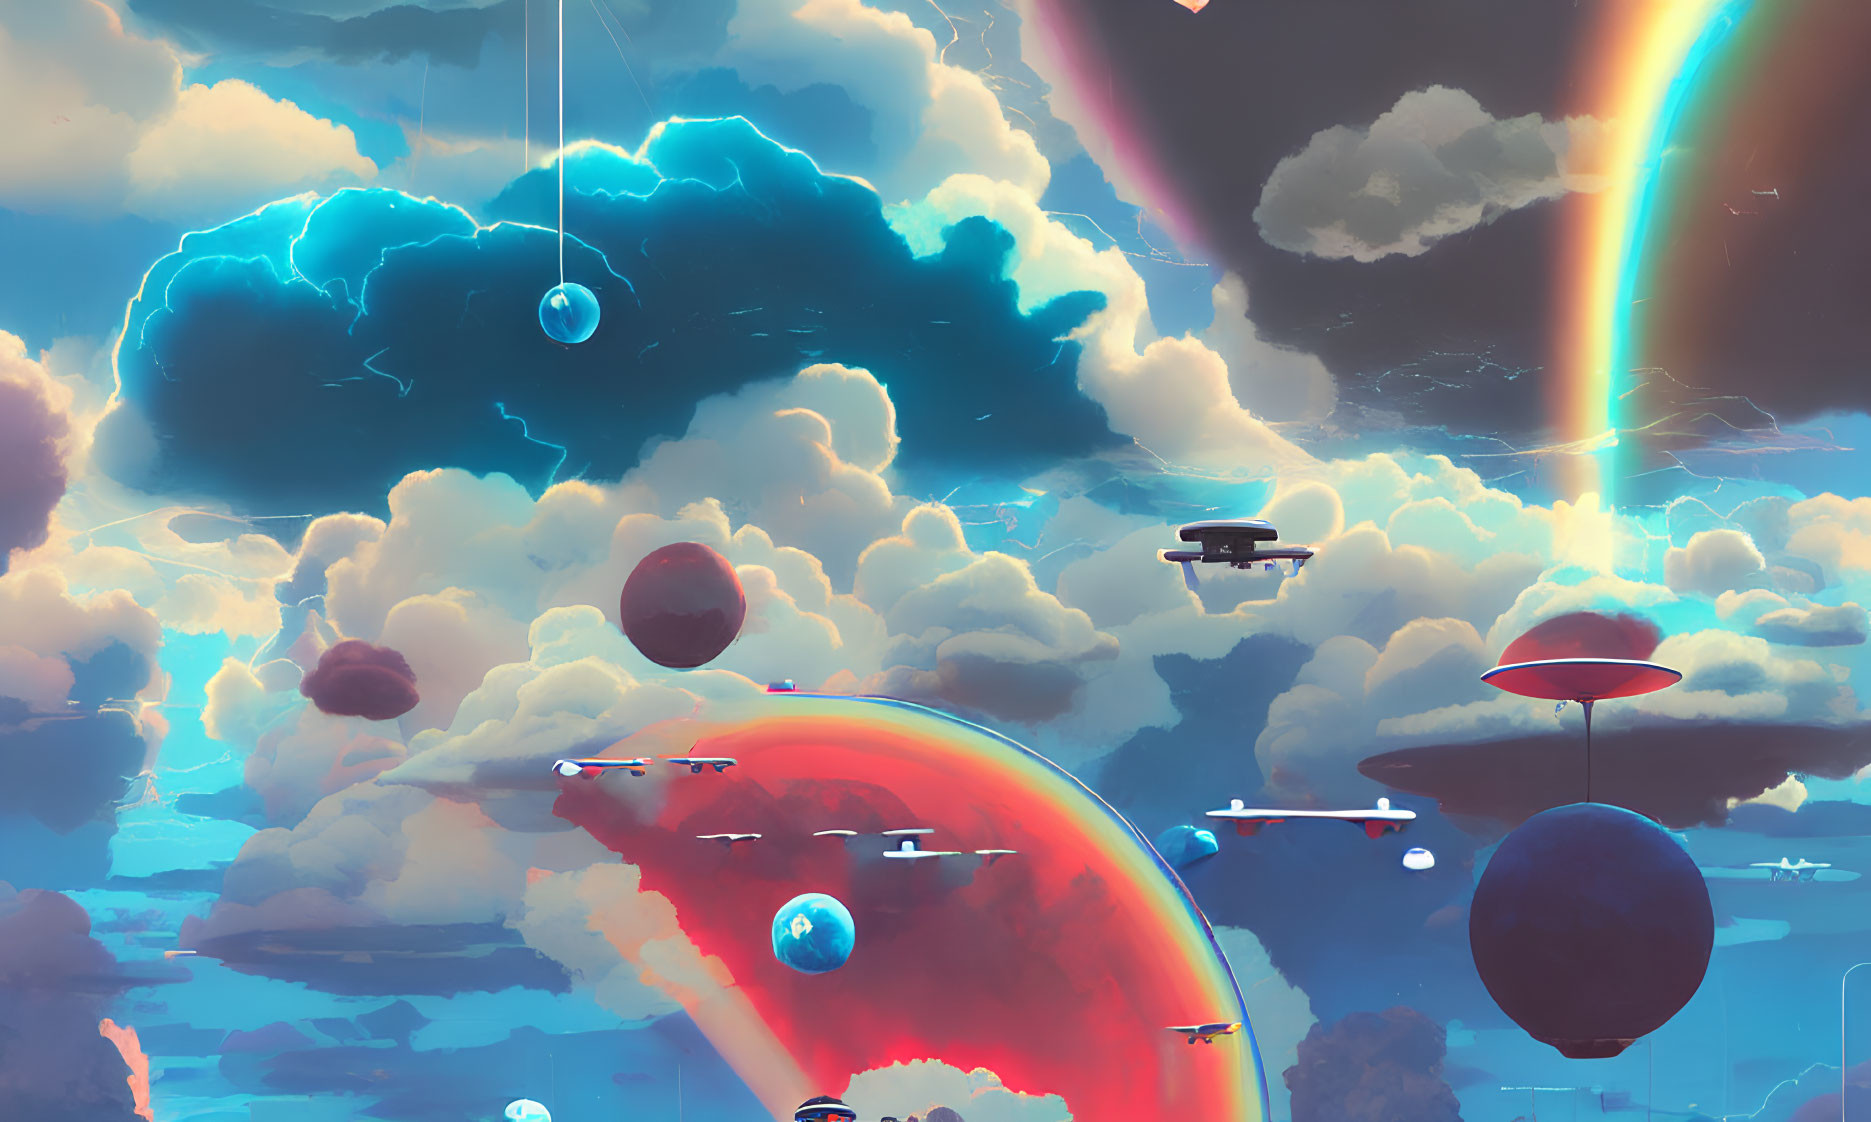 Colorful sky with rainbows and futuristic structures in dreamlike setting